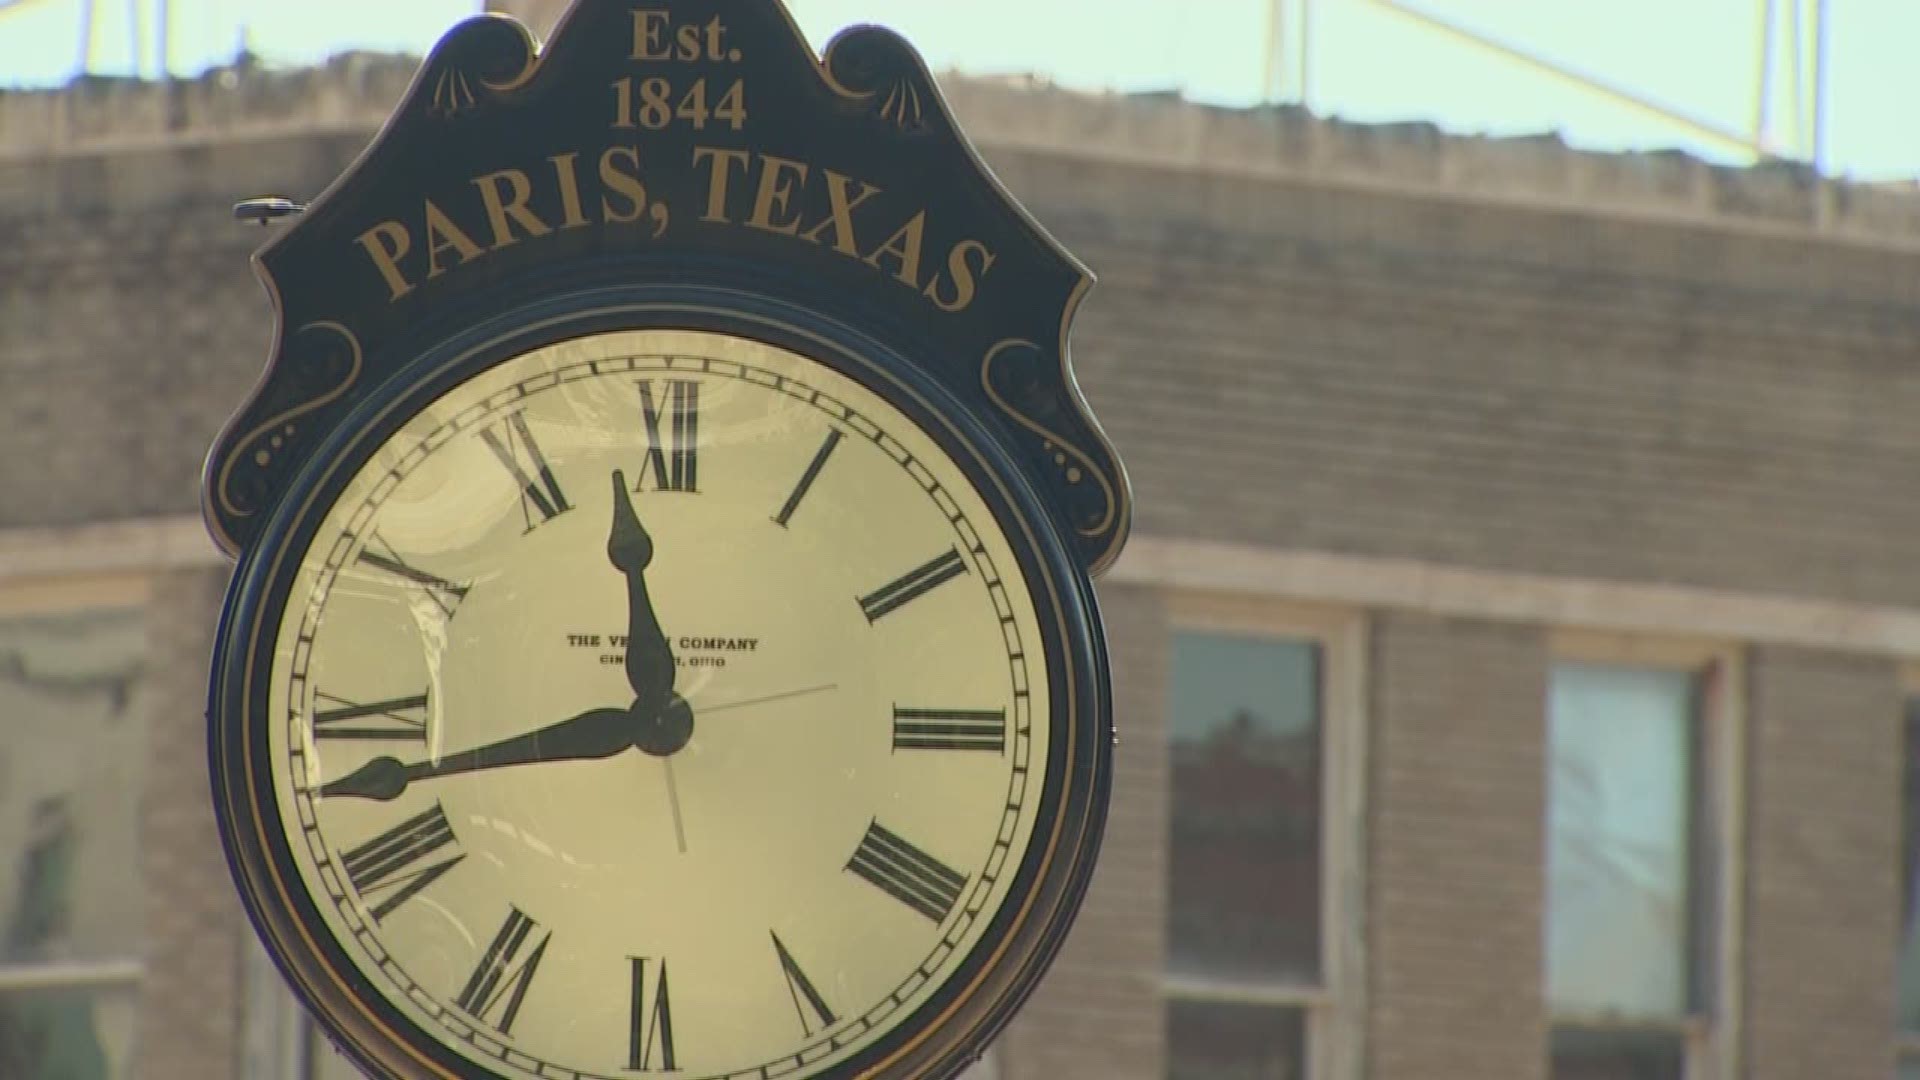 African Americans sue over workplace discrimination in Paris, Texas